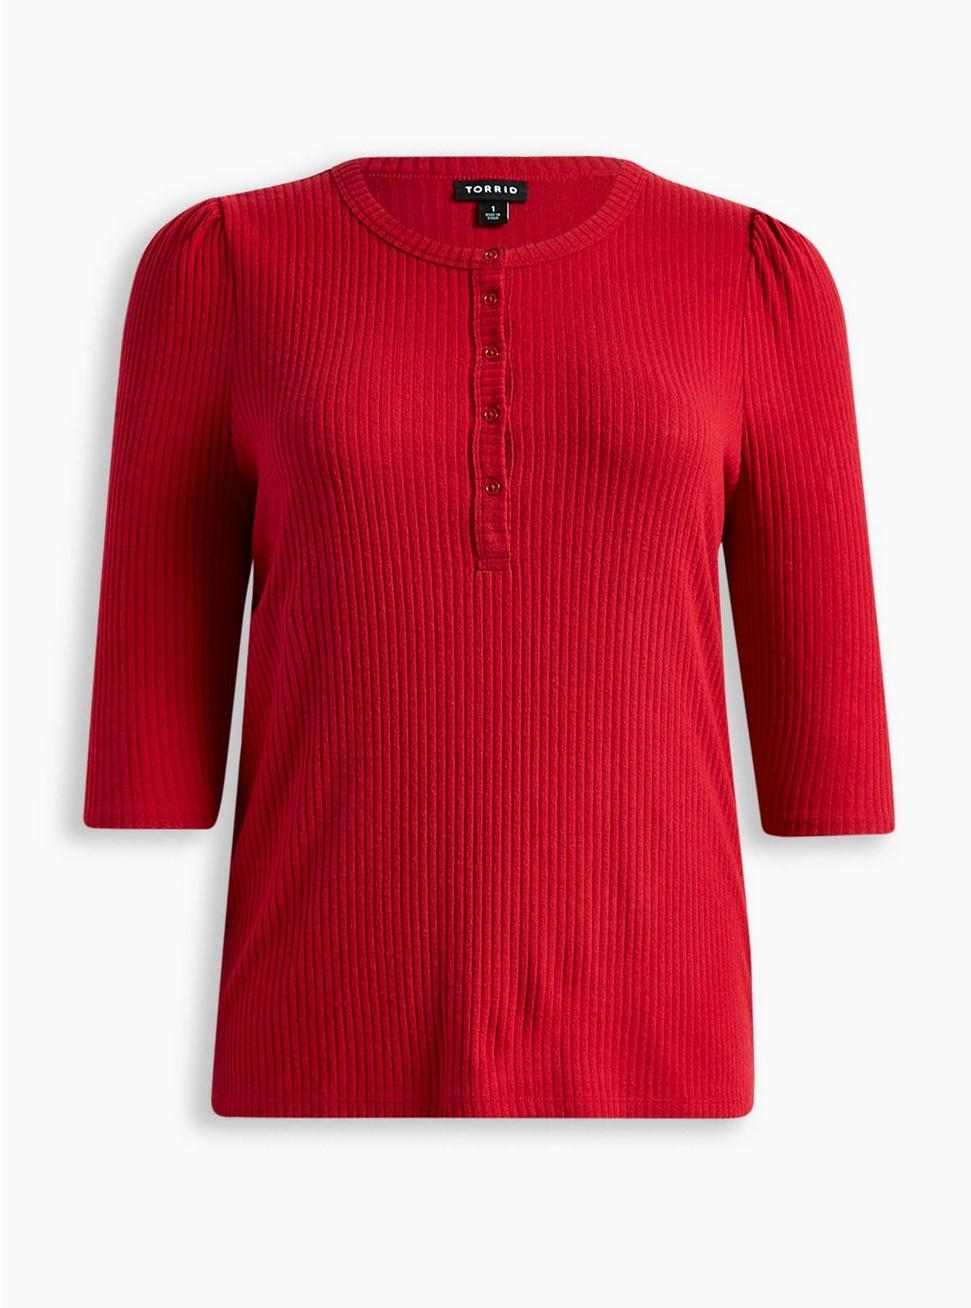 Plus Size Light Weight Rib Hacci 3/4 Sleeve Henley Top, RED, hi-res